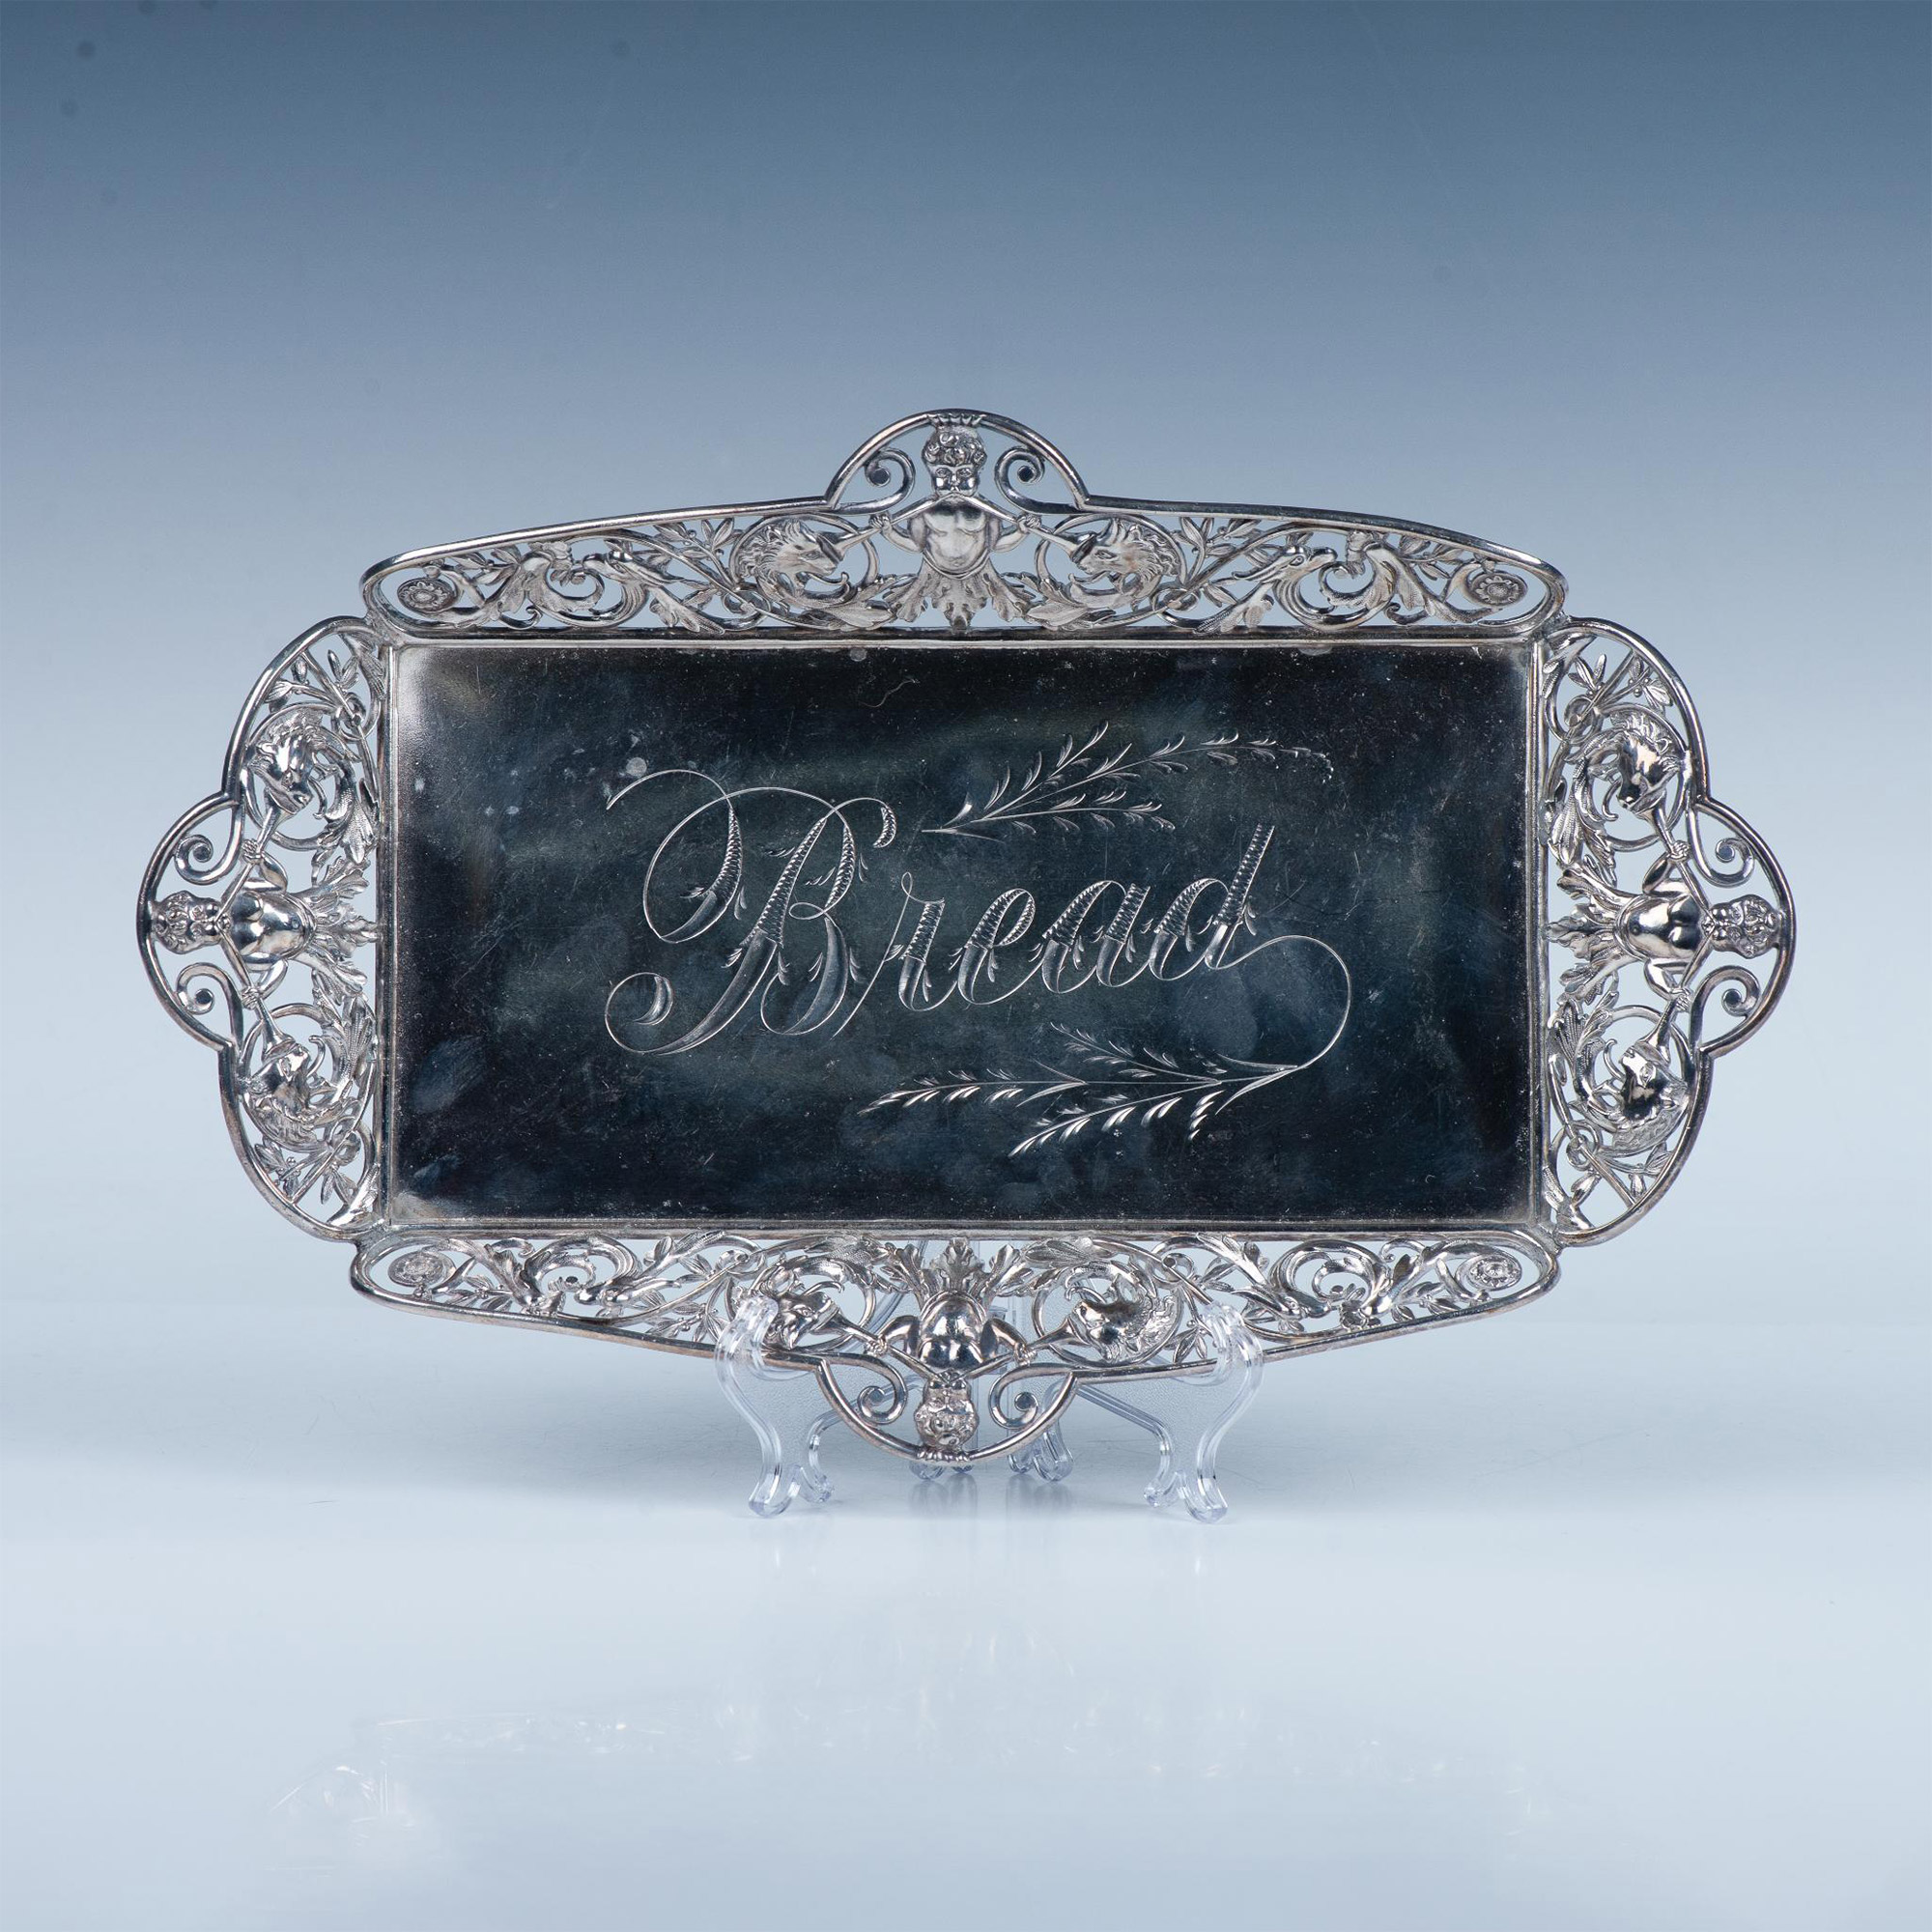 James W. Tufts Silver Plate Bread Tray - Image 2 of 5